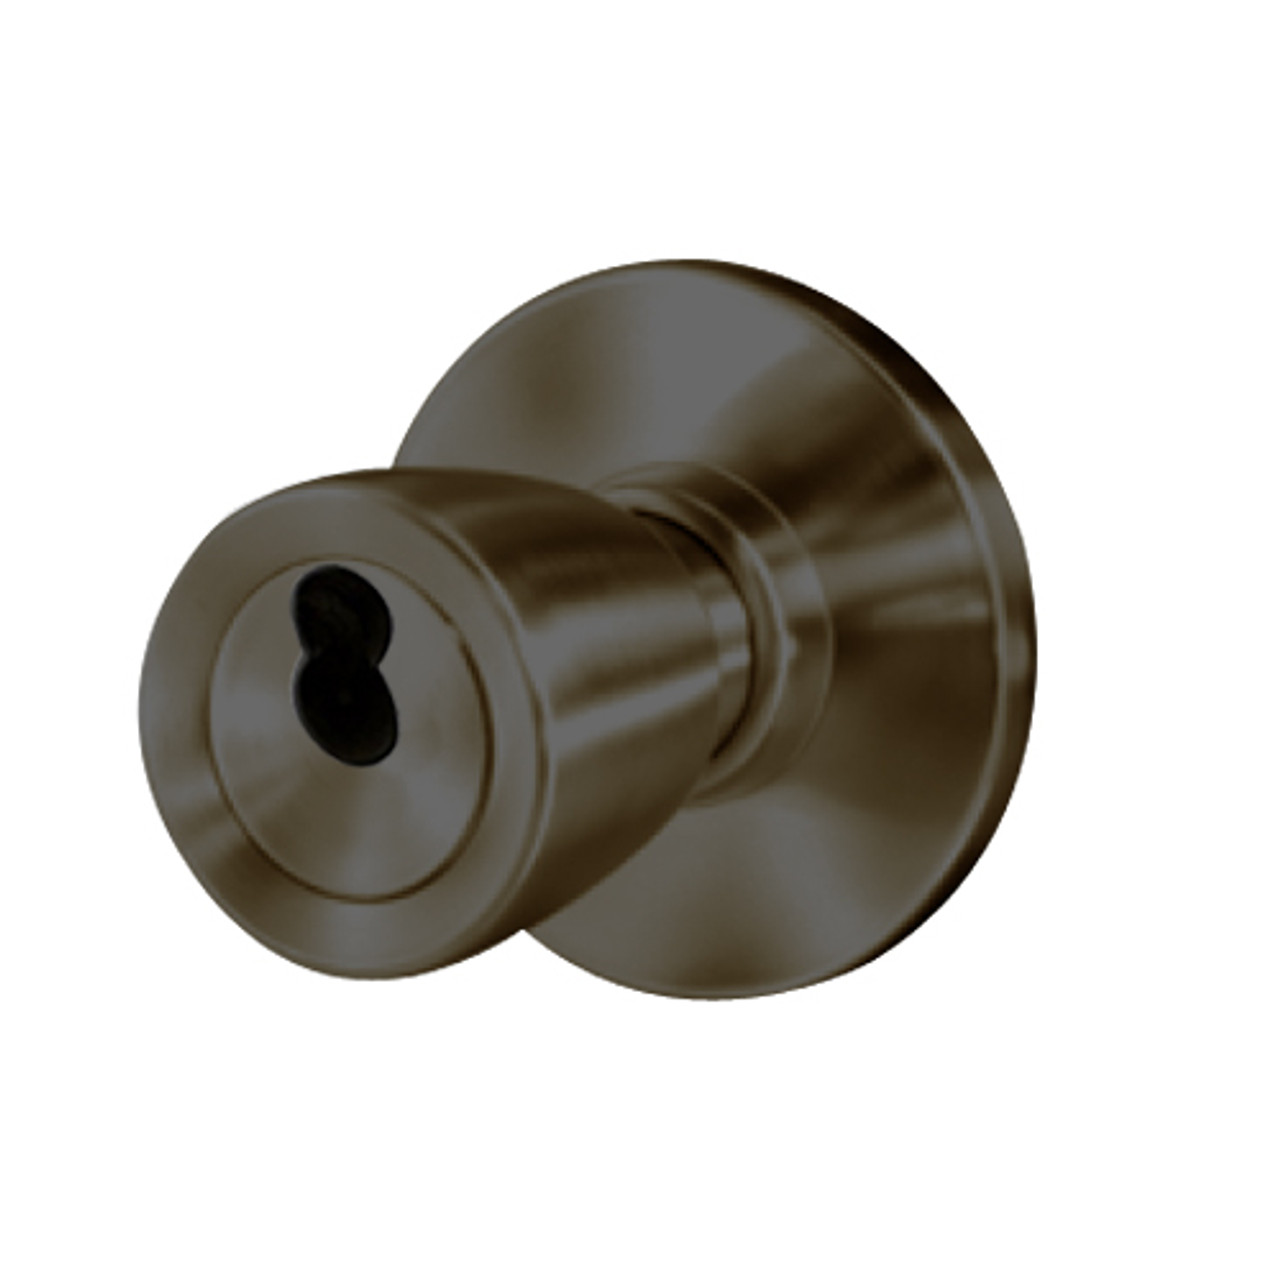 8K37D6AS3613 Best 8K Series Storeroom Heavy Duty Cylindrical Knob Locks with Tulip Style in Oil Rubbed Bronze